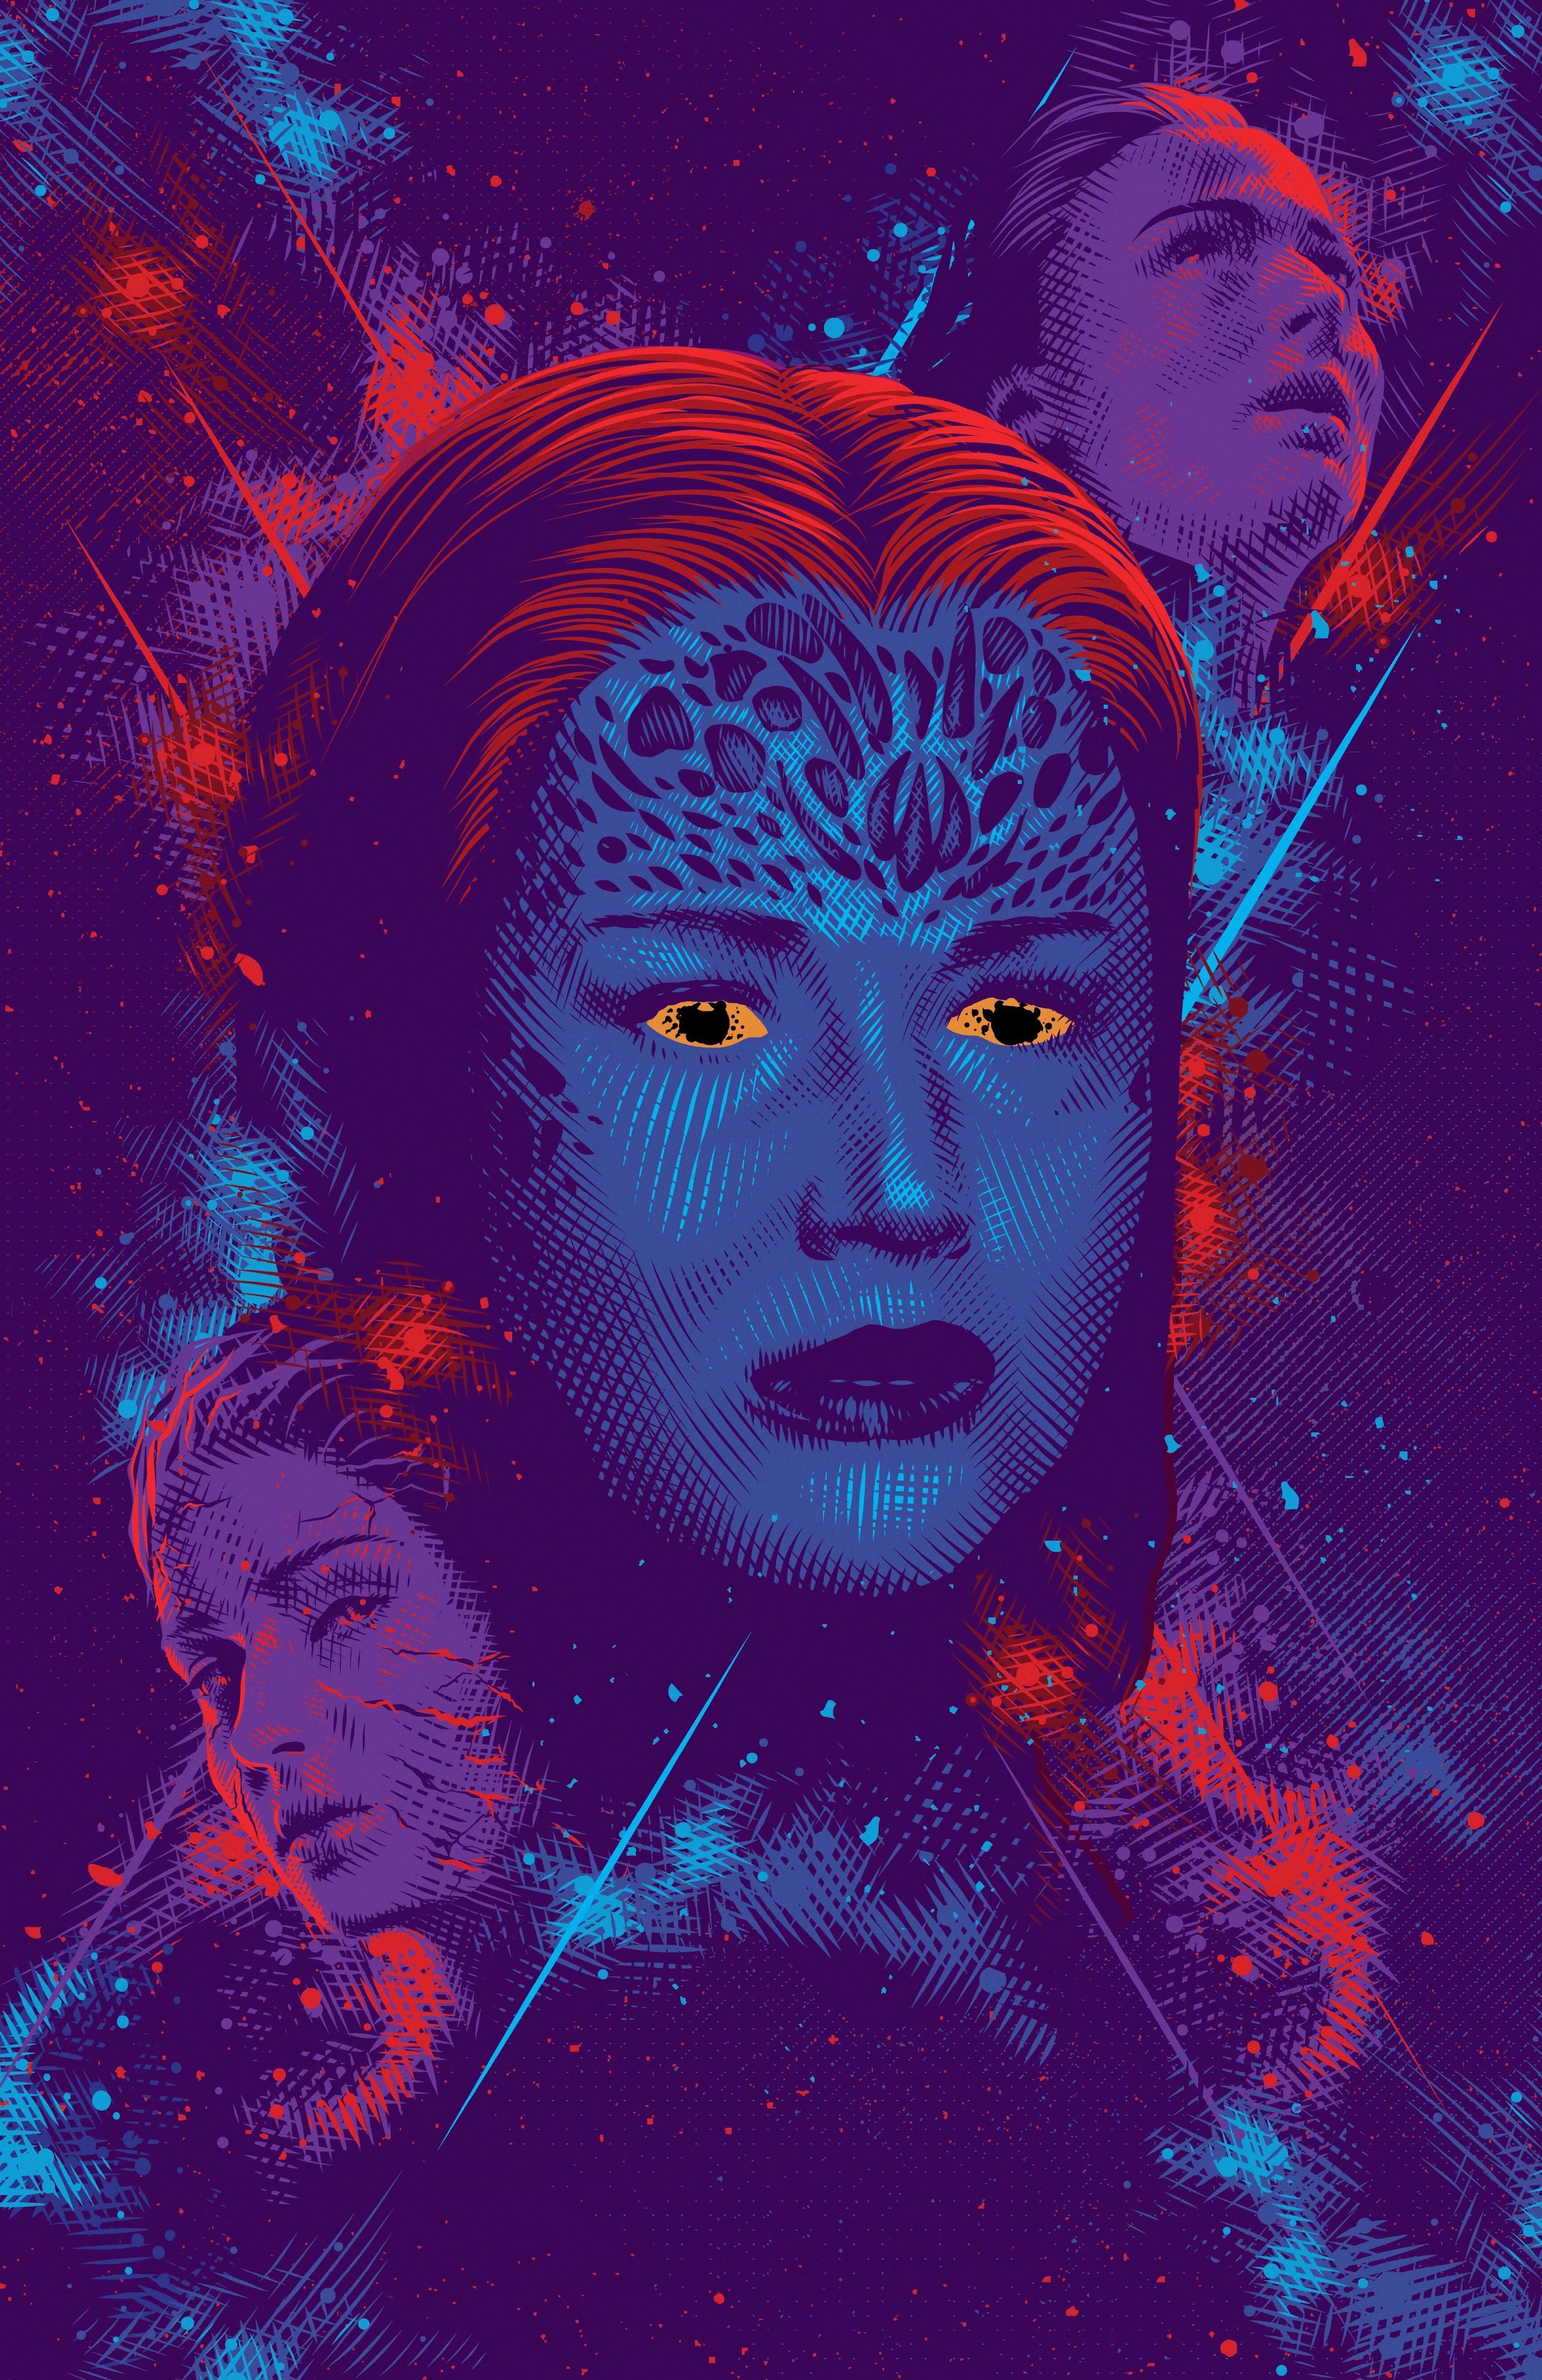 A digital artwork featuring a woman with glowing eyes and a third person behind her. - Jennifer Lawrence